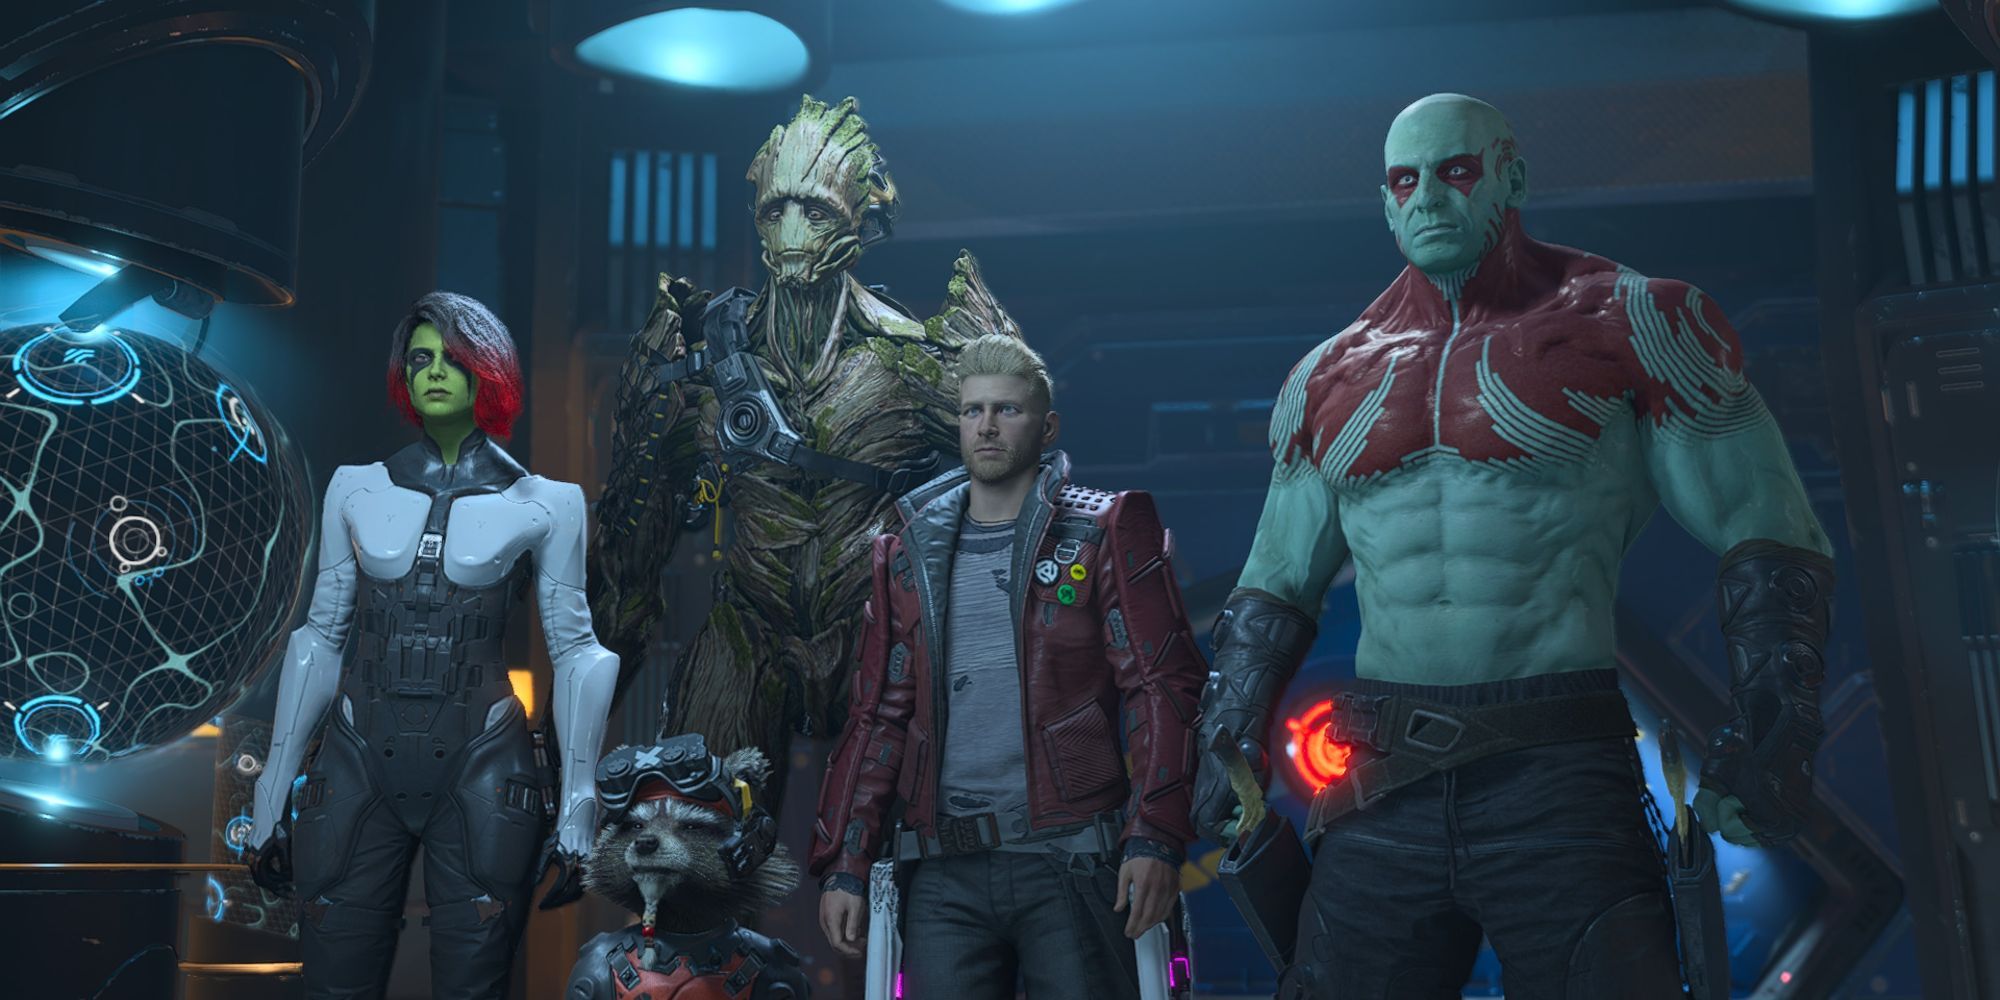 image from the game Marvels Guardians of the Galaxy featuring Star Lord Drax Groot Gamora